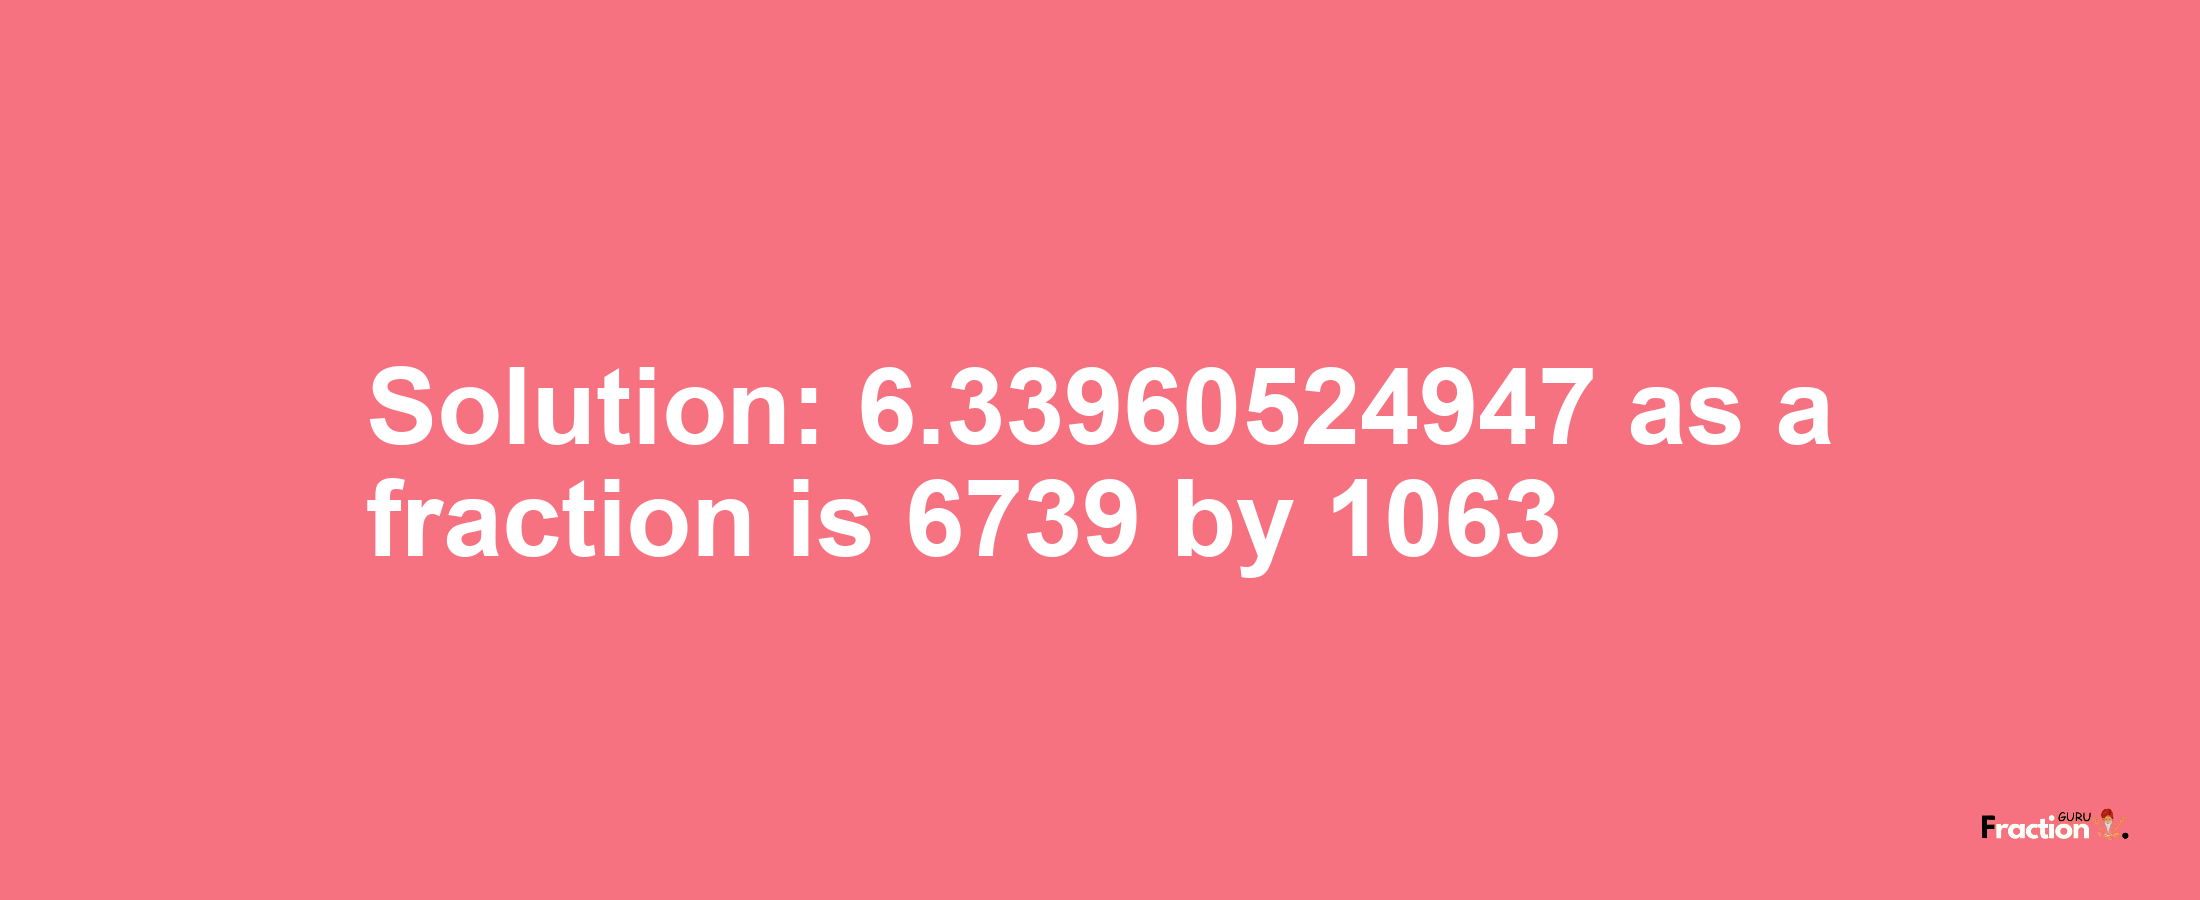 Solution:6.33960524947 as a fraction is 6739/1063